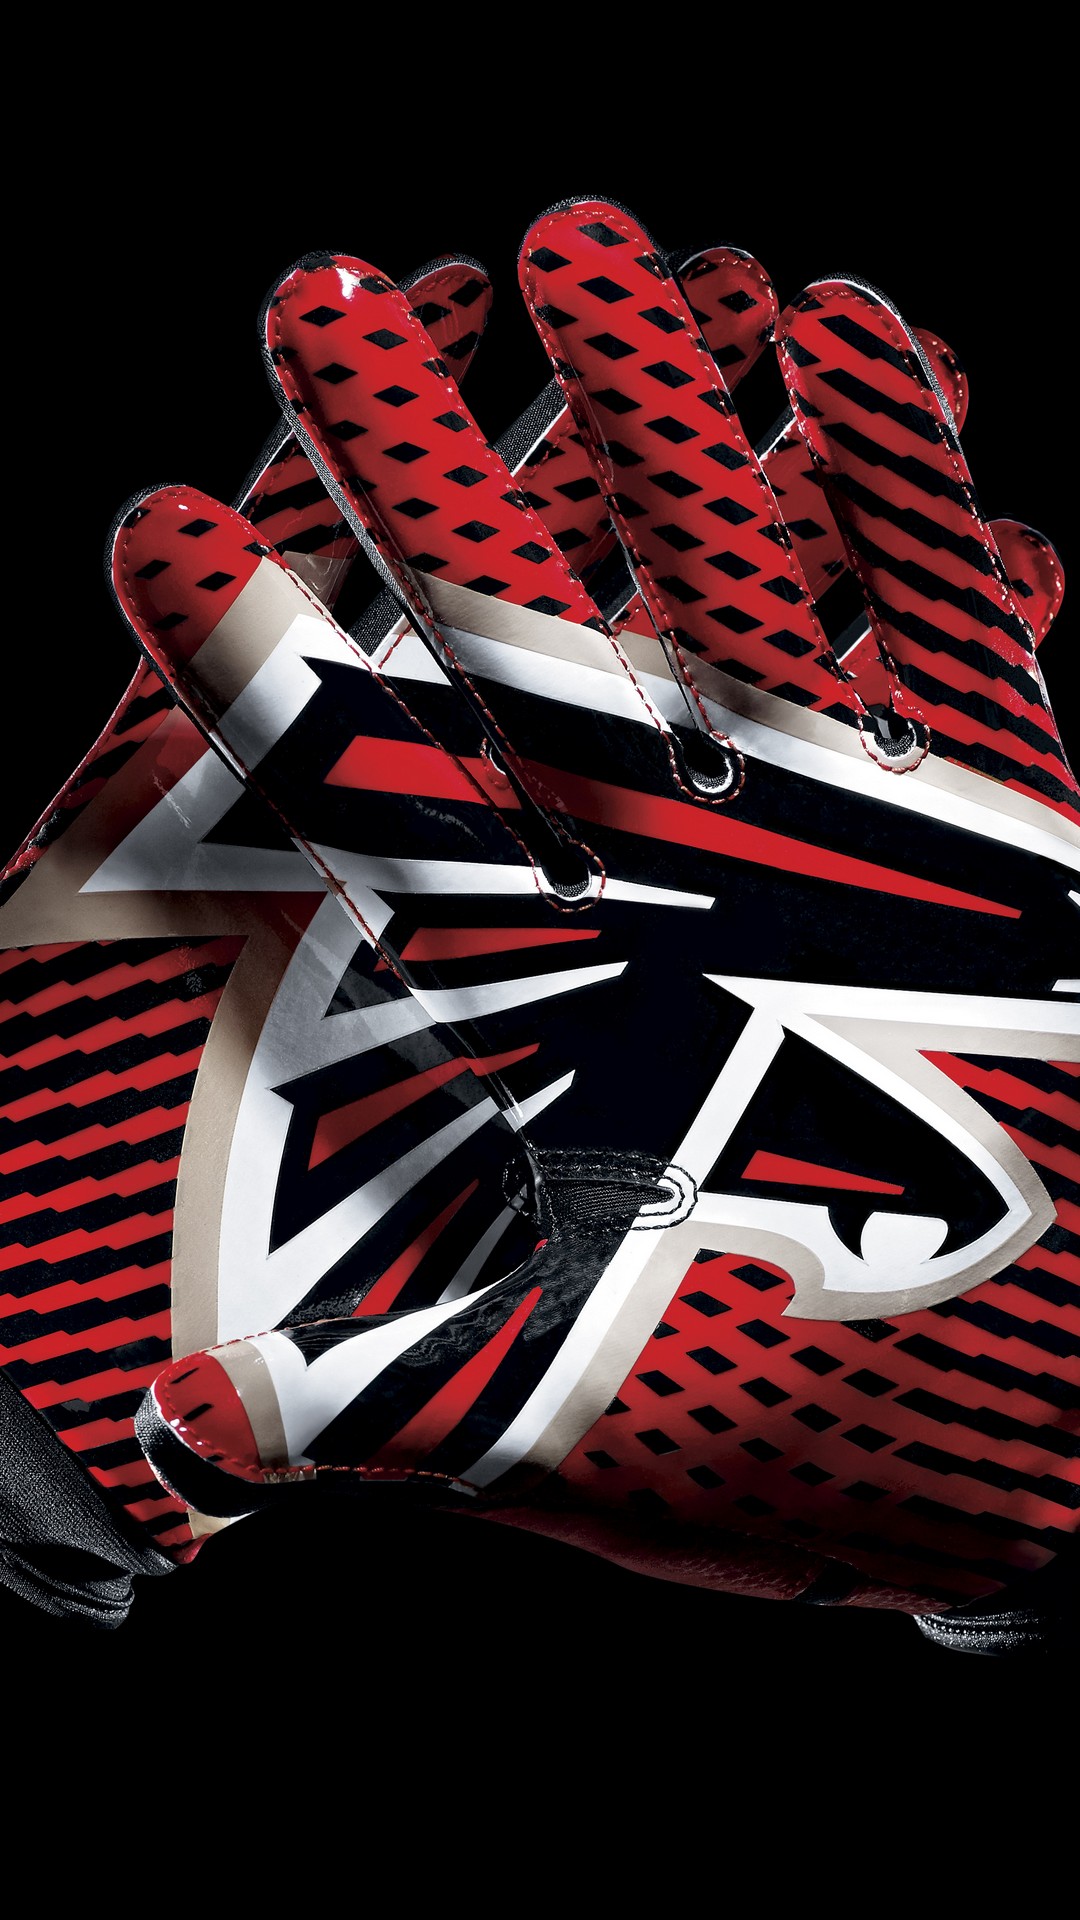 Atlanta Falcons iPhone Screen Lock Wallpaper With high-resolution 1080X1920 pixel. Download and set as wallpaper for Apple iPhone X, XS Max, XR, 8, 7, 6, SE, iPad, Android